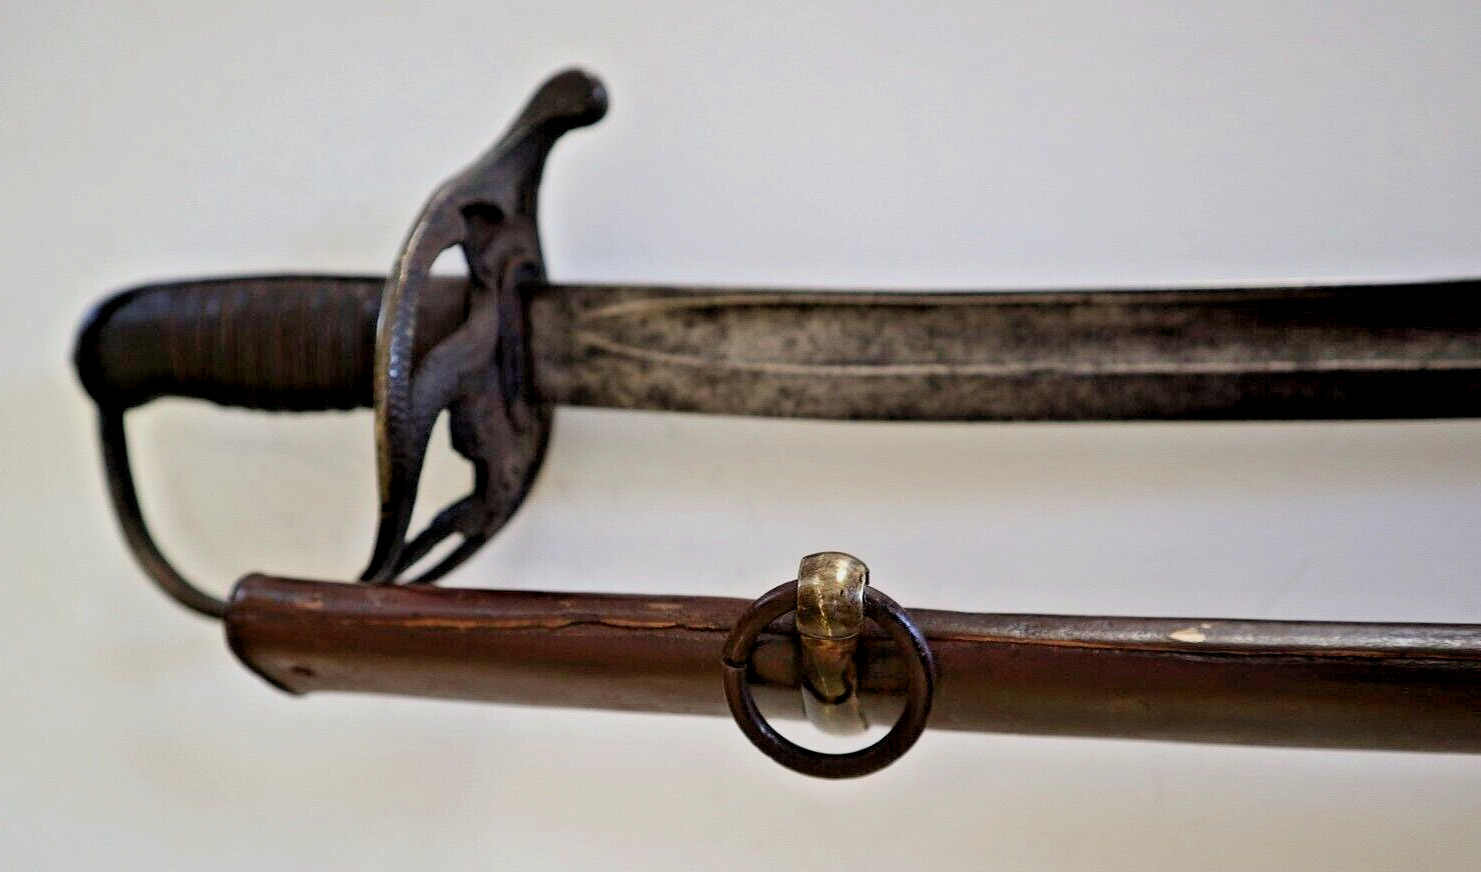 CIVIL WAR CONFEDERATE COLLEGE HILL ARSENAL OFFICER CAVALRY SWORD W CSA ON GUARD